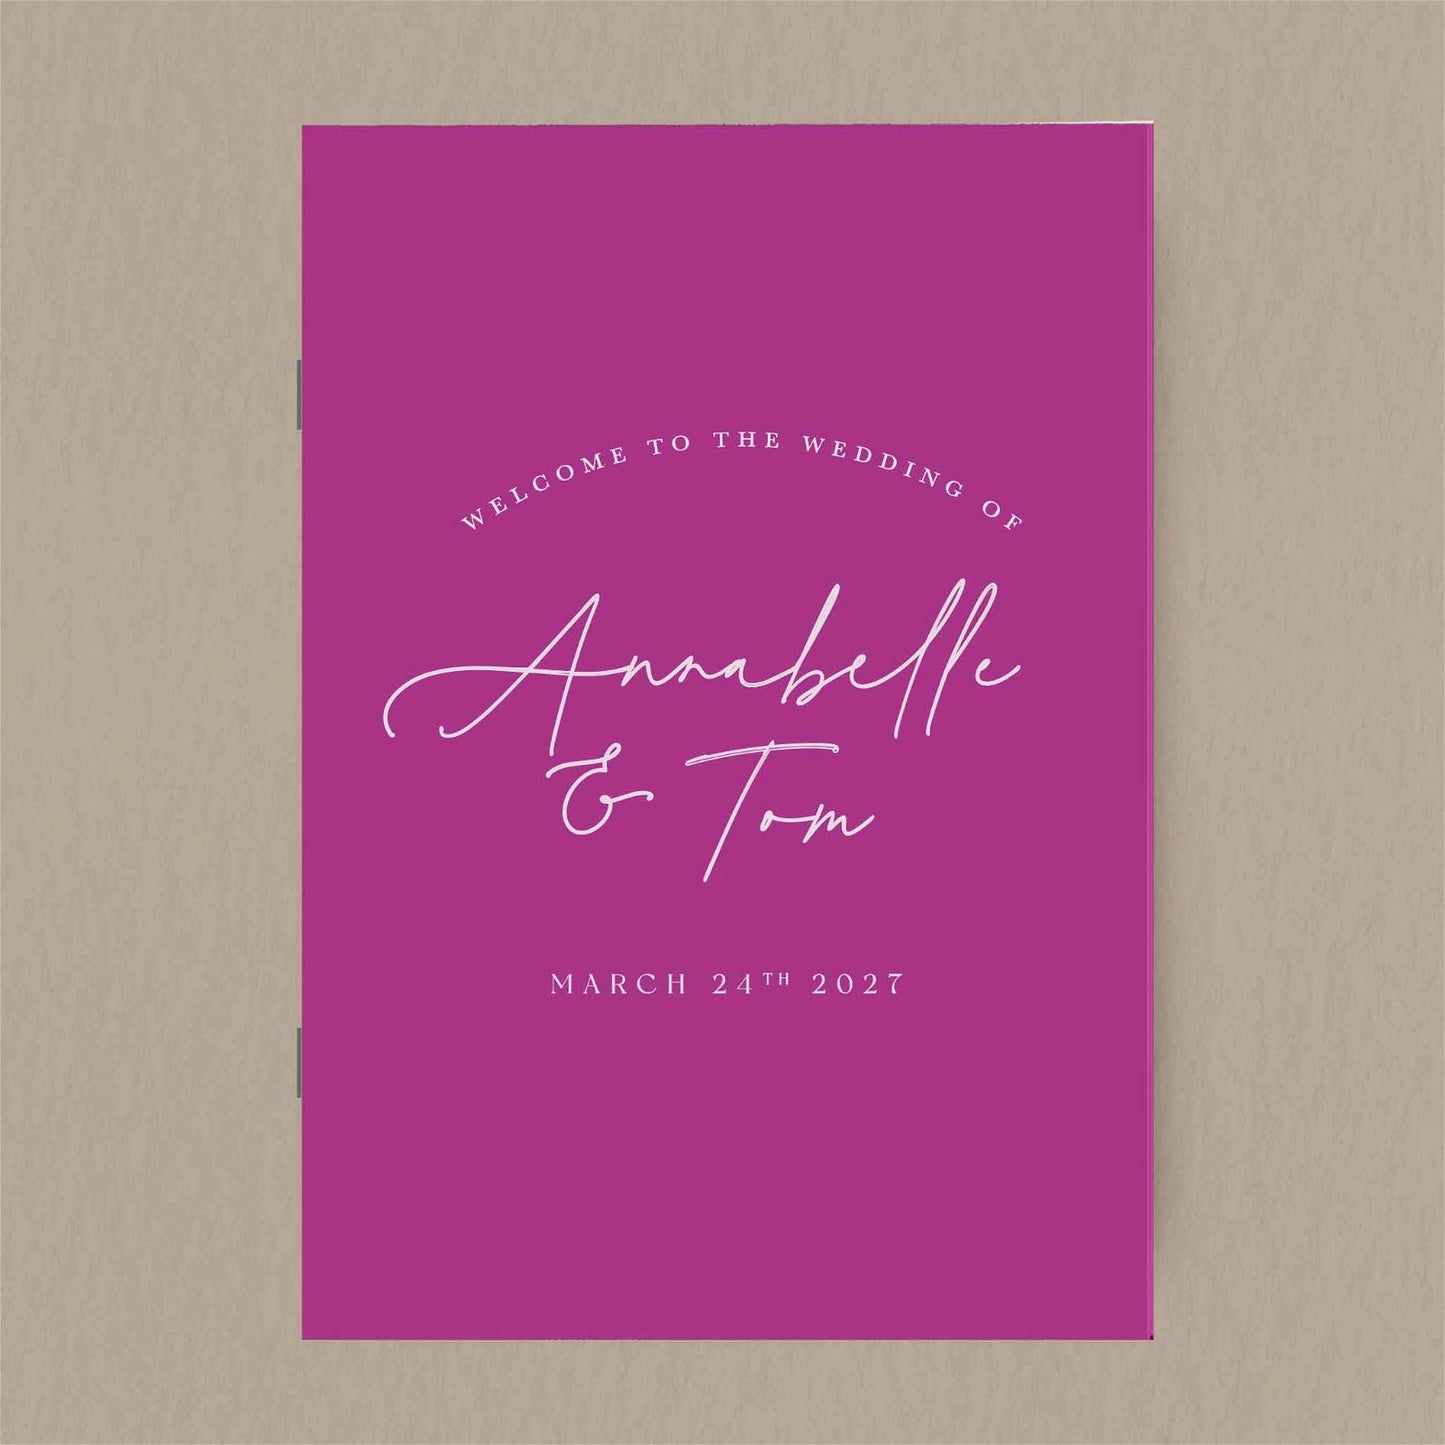 Annabelle Order Of Service  Ivy and Gold Wedding Stationery   